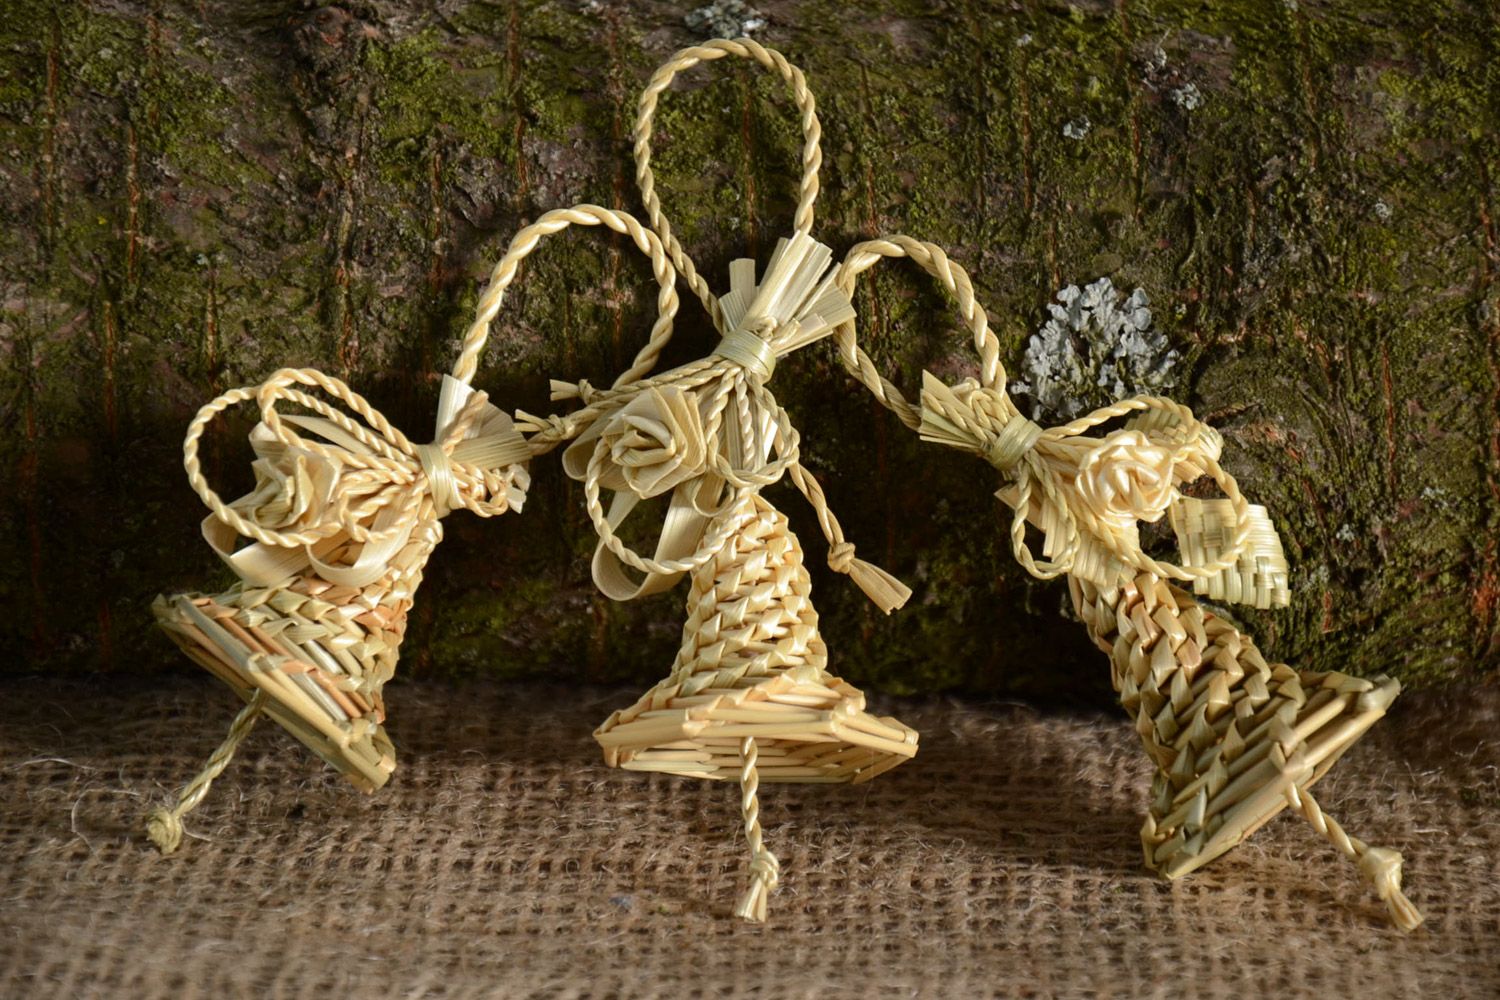 Handmade decorative wall hanging bells woven of natural straw set of 3 items photo 1